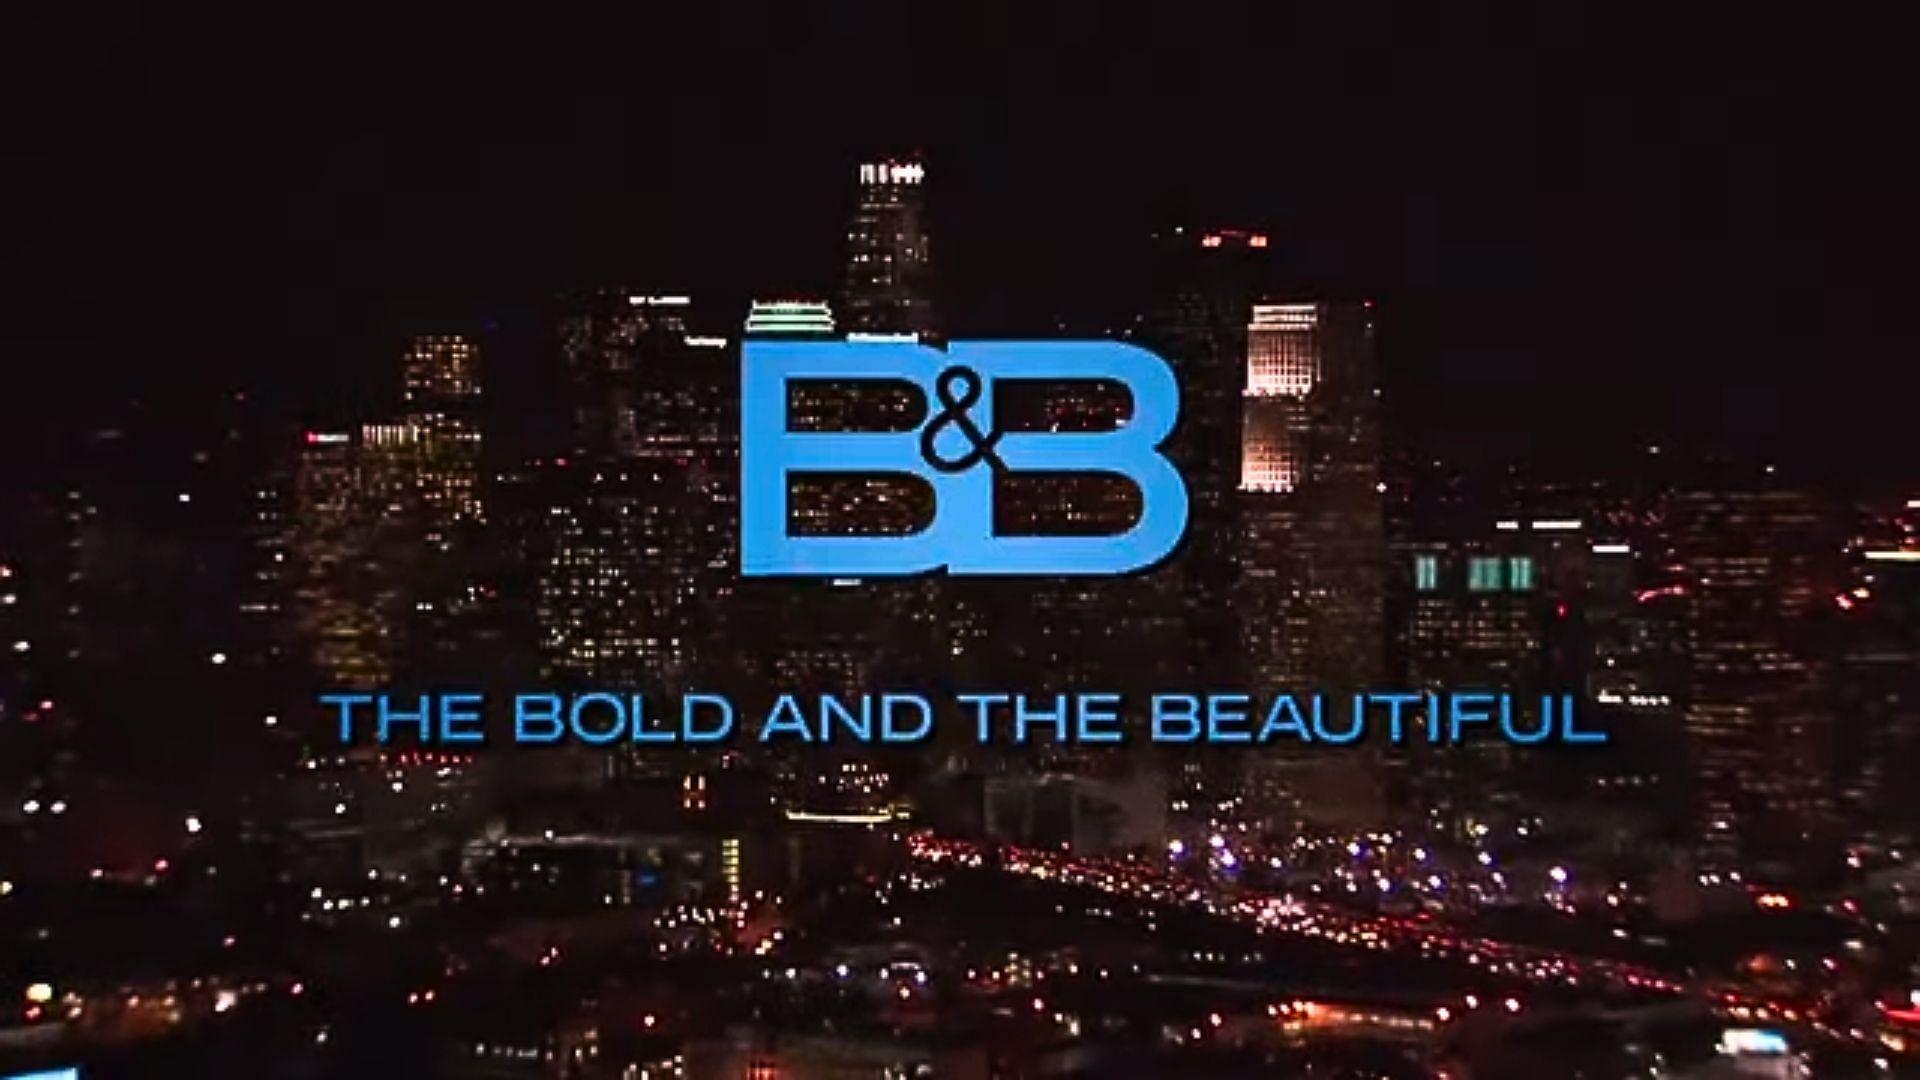 The Bold and the Beautiful promises many ups and downs this week (Image via YouTube/ boldandbeautiful, 18:29)